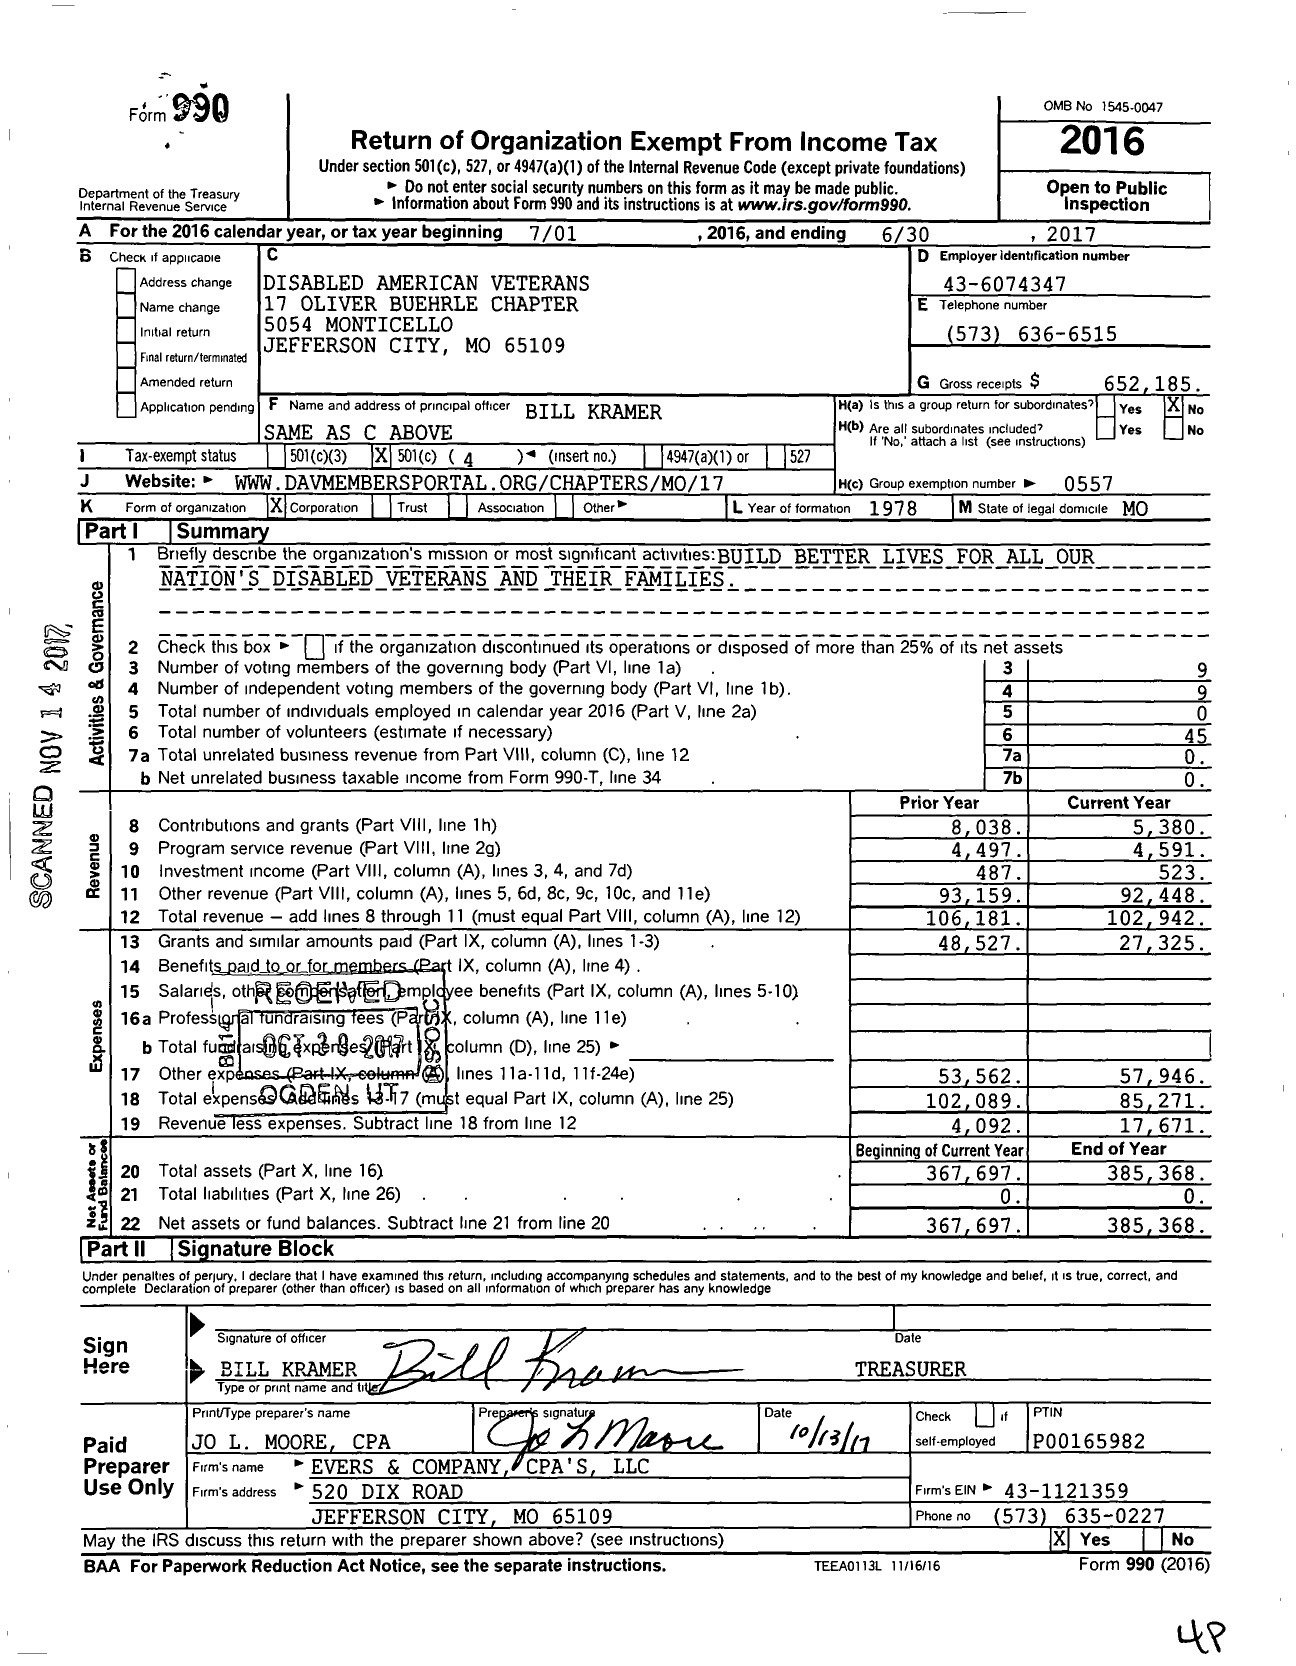 Image of first page of 2016 Form 990O for Disabled American Veterans 17 Oliver Buehrle Chapter